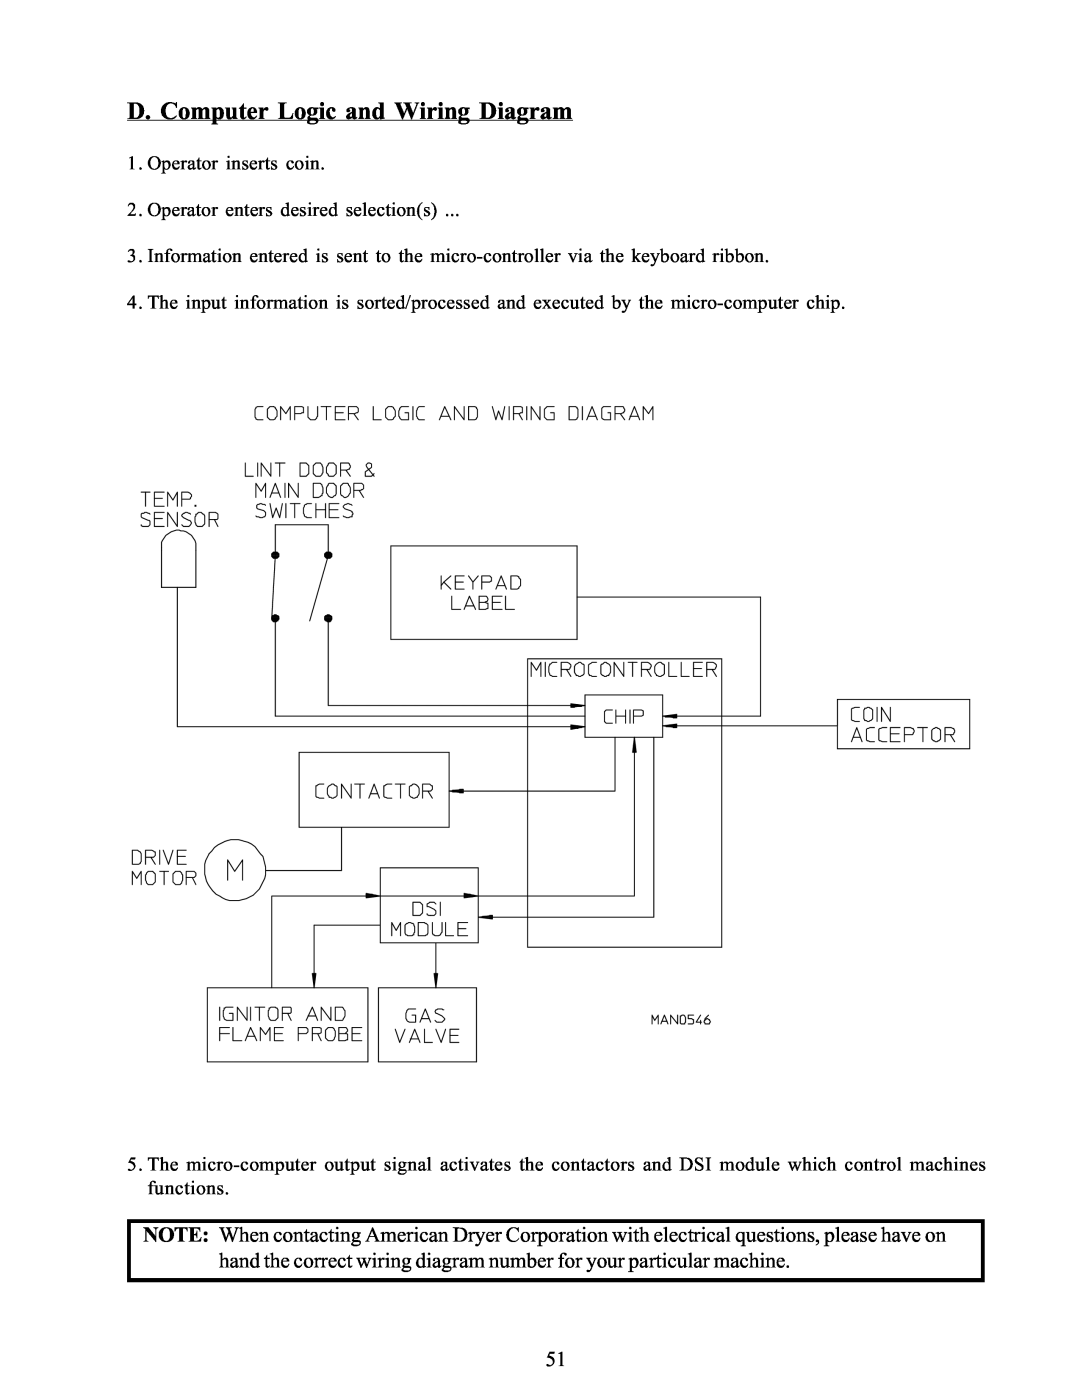 American Dryer Corp WDA-385 service manual D. Computer Logic and Wiring Diagram 